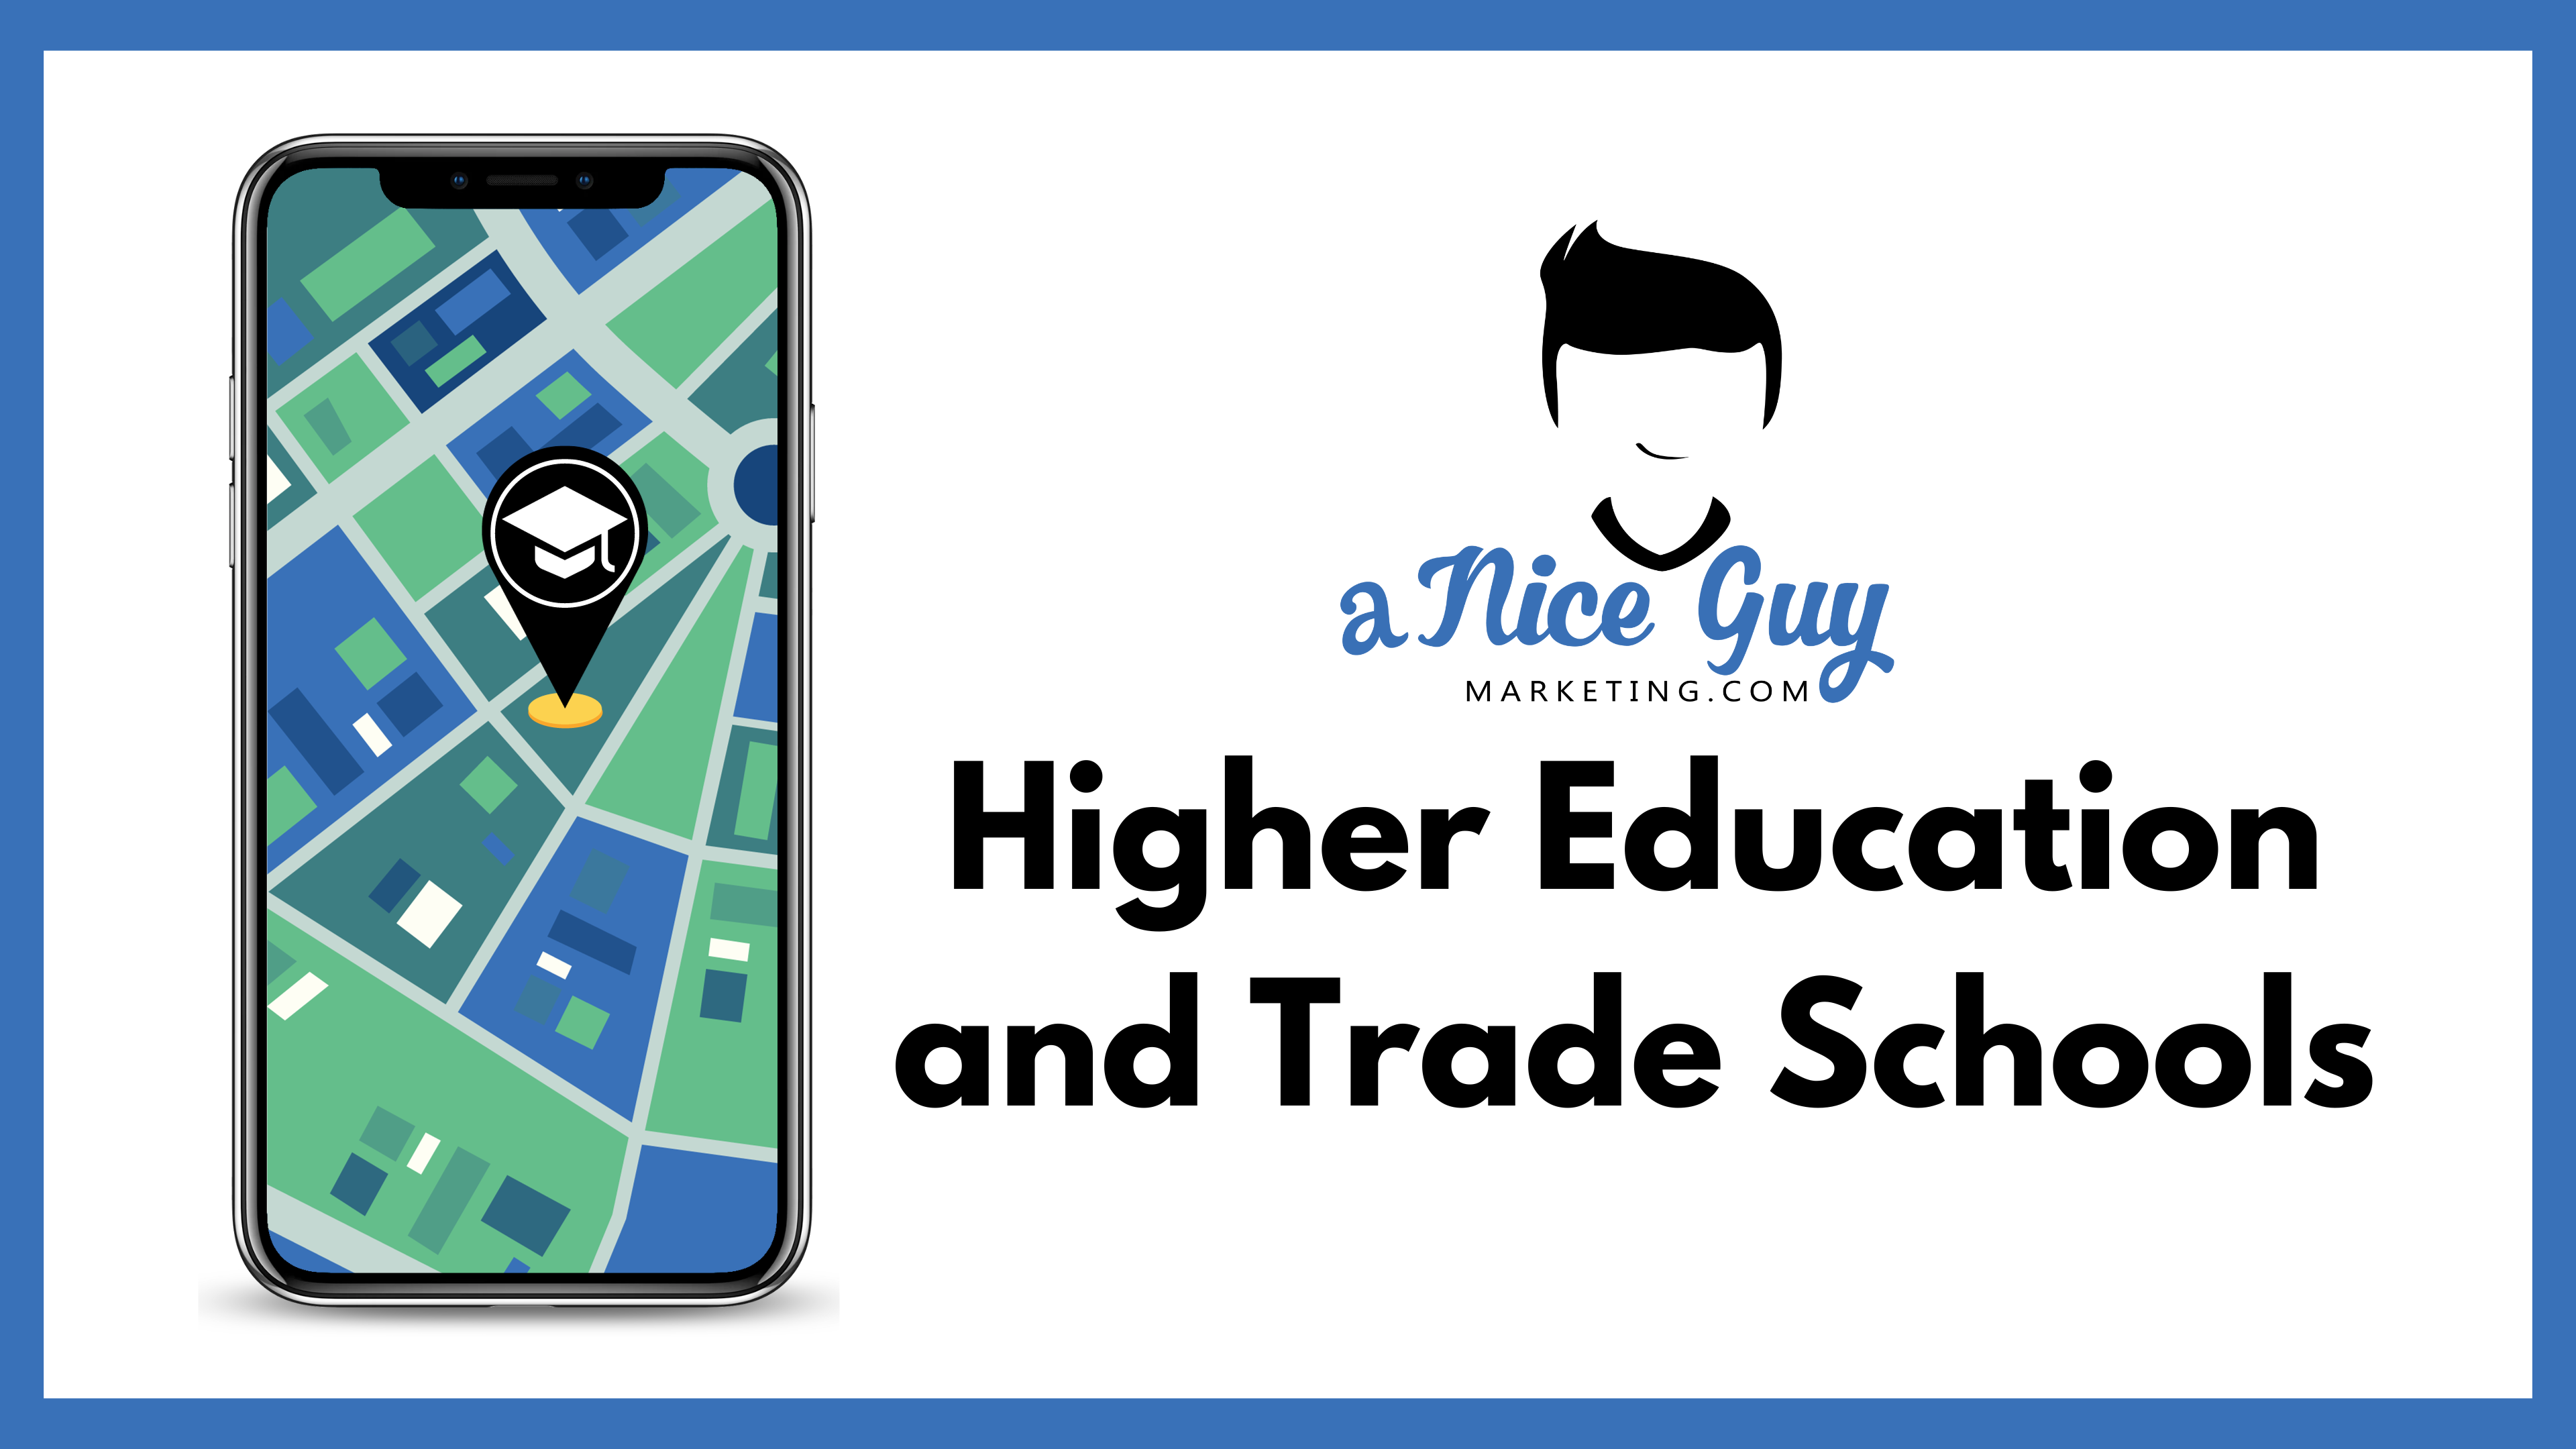 Geofencing for Higher Education and Trade Schools